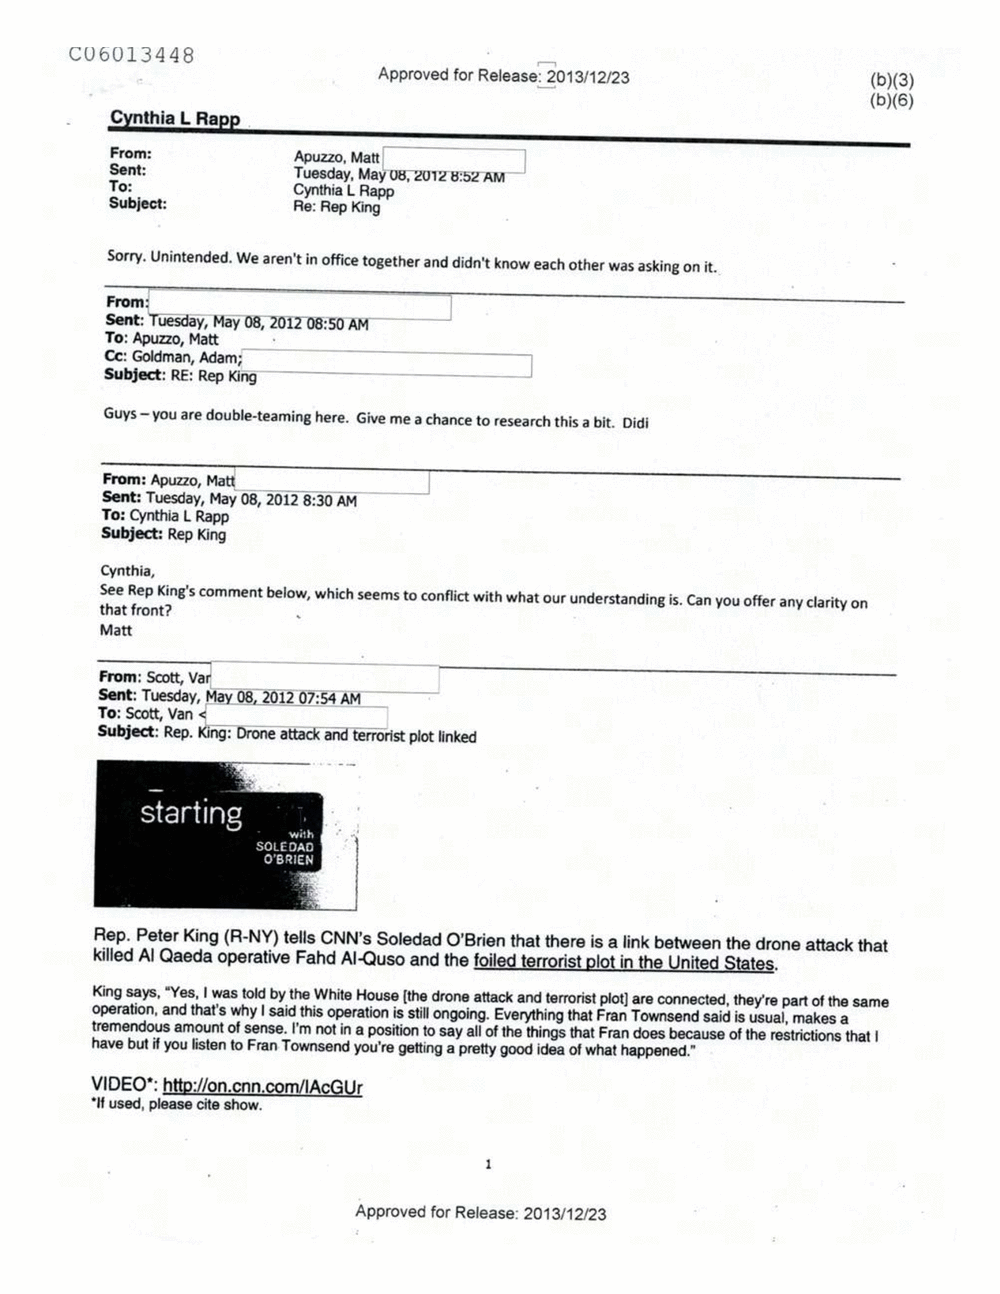 Page 312 from Email Correspondence Between Reporters and CIA Flacks